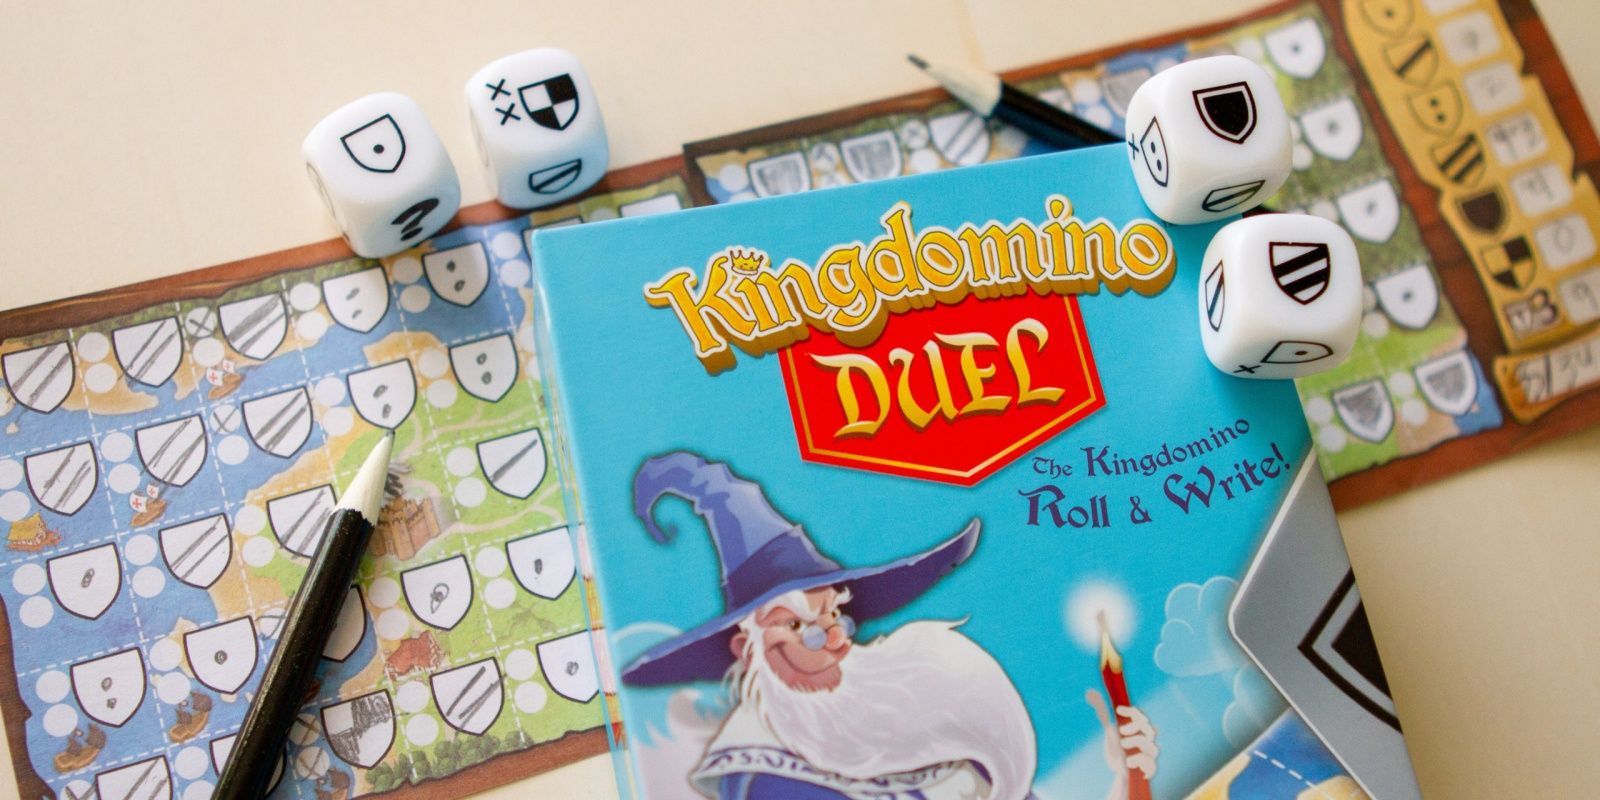 Kingdomino Duel Board Game Being Played